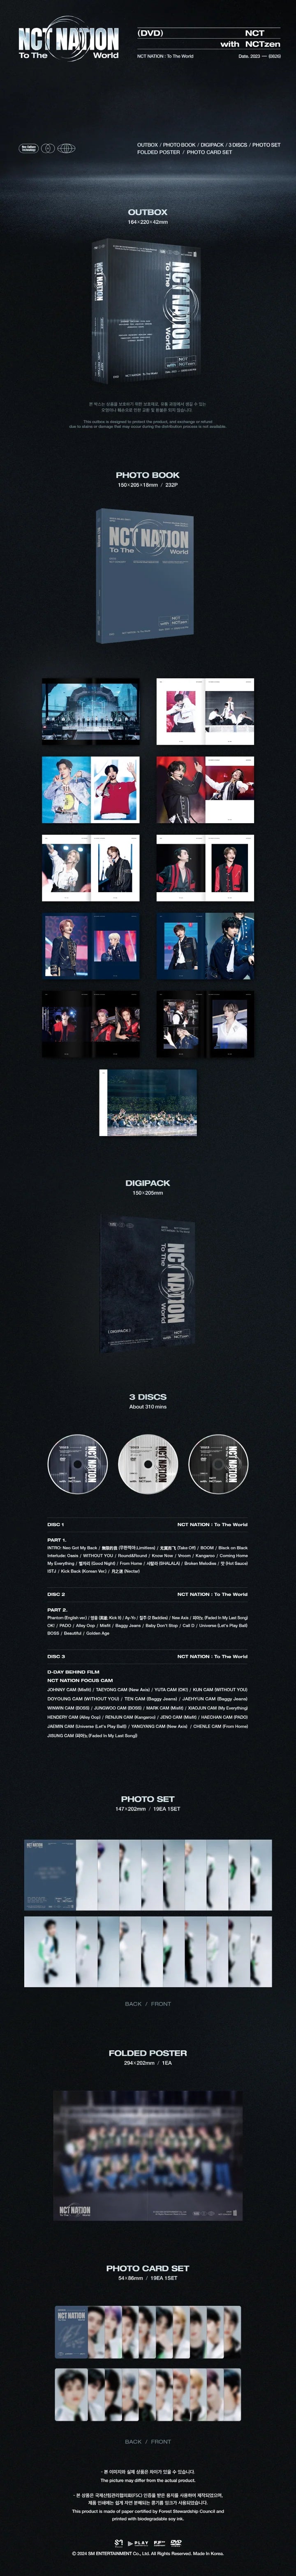 2023 NCT CONCERT - NCT NATION To The World in INCHEON DVD Infographic